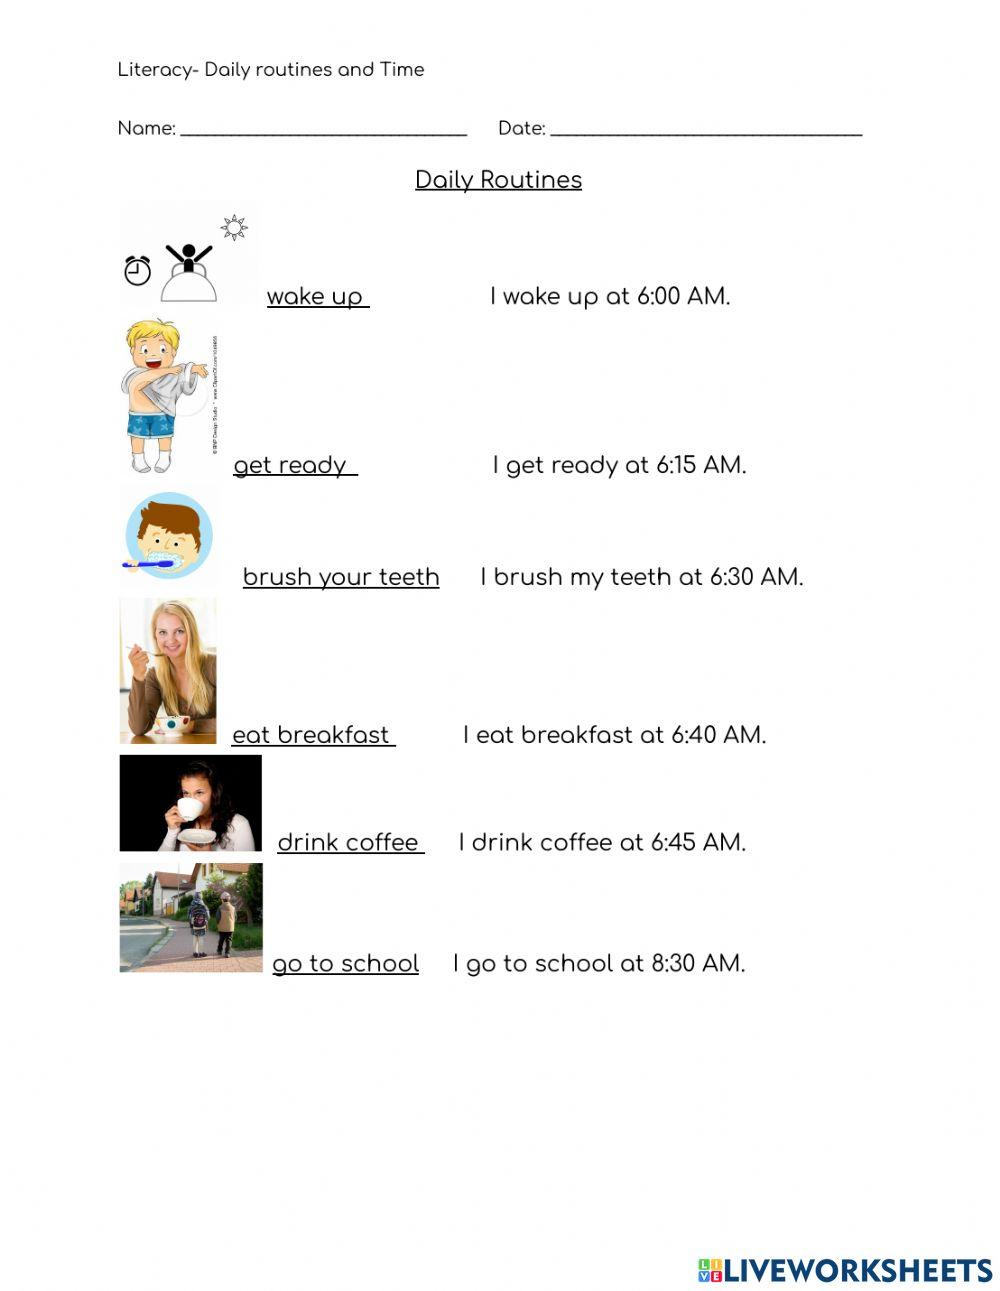 Daily Routines and Time